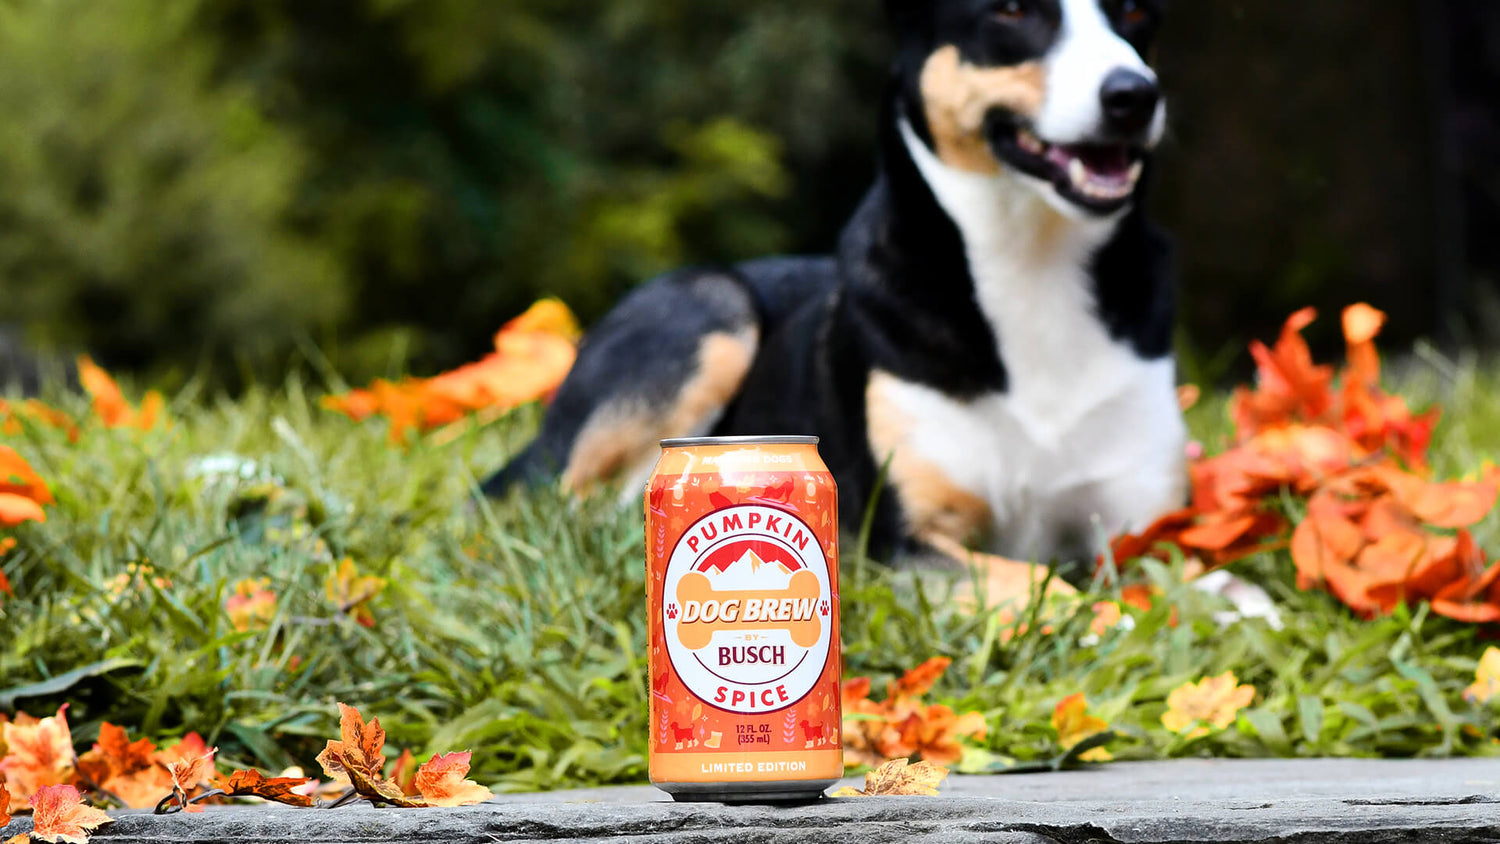 Dog laying in grass near a single can of Pumpkin Spice Dog Brew by Busch